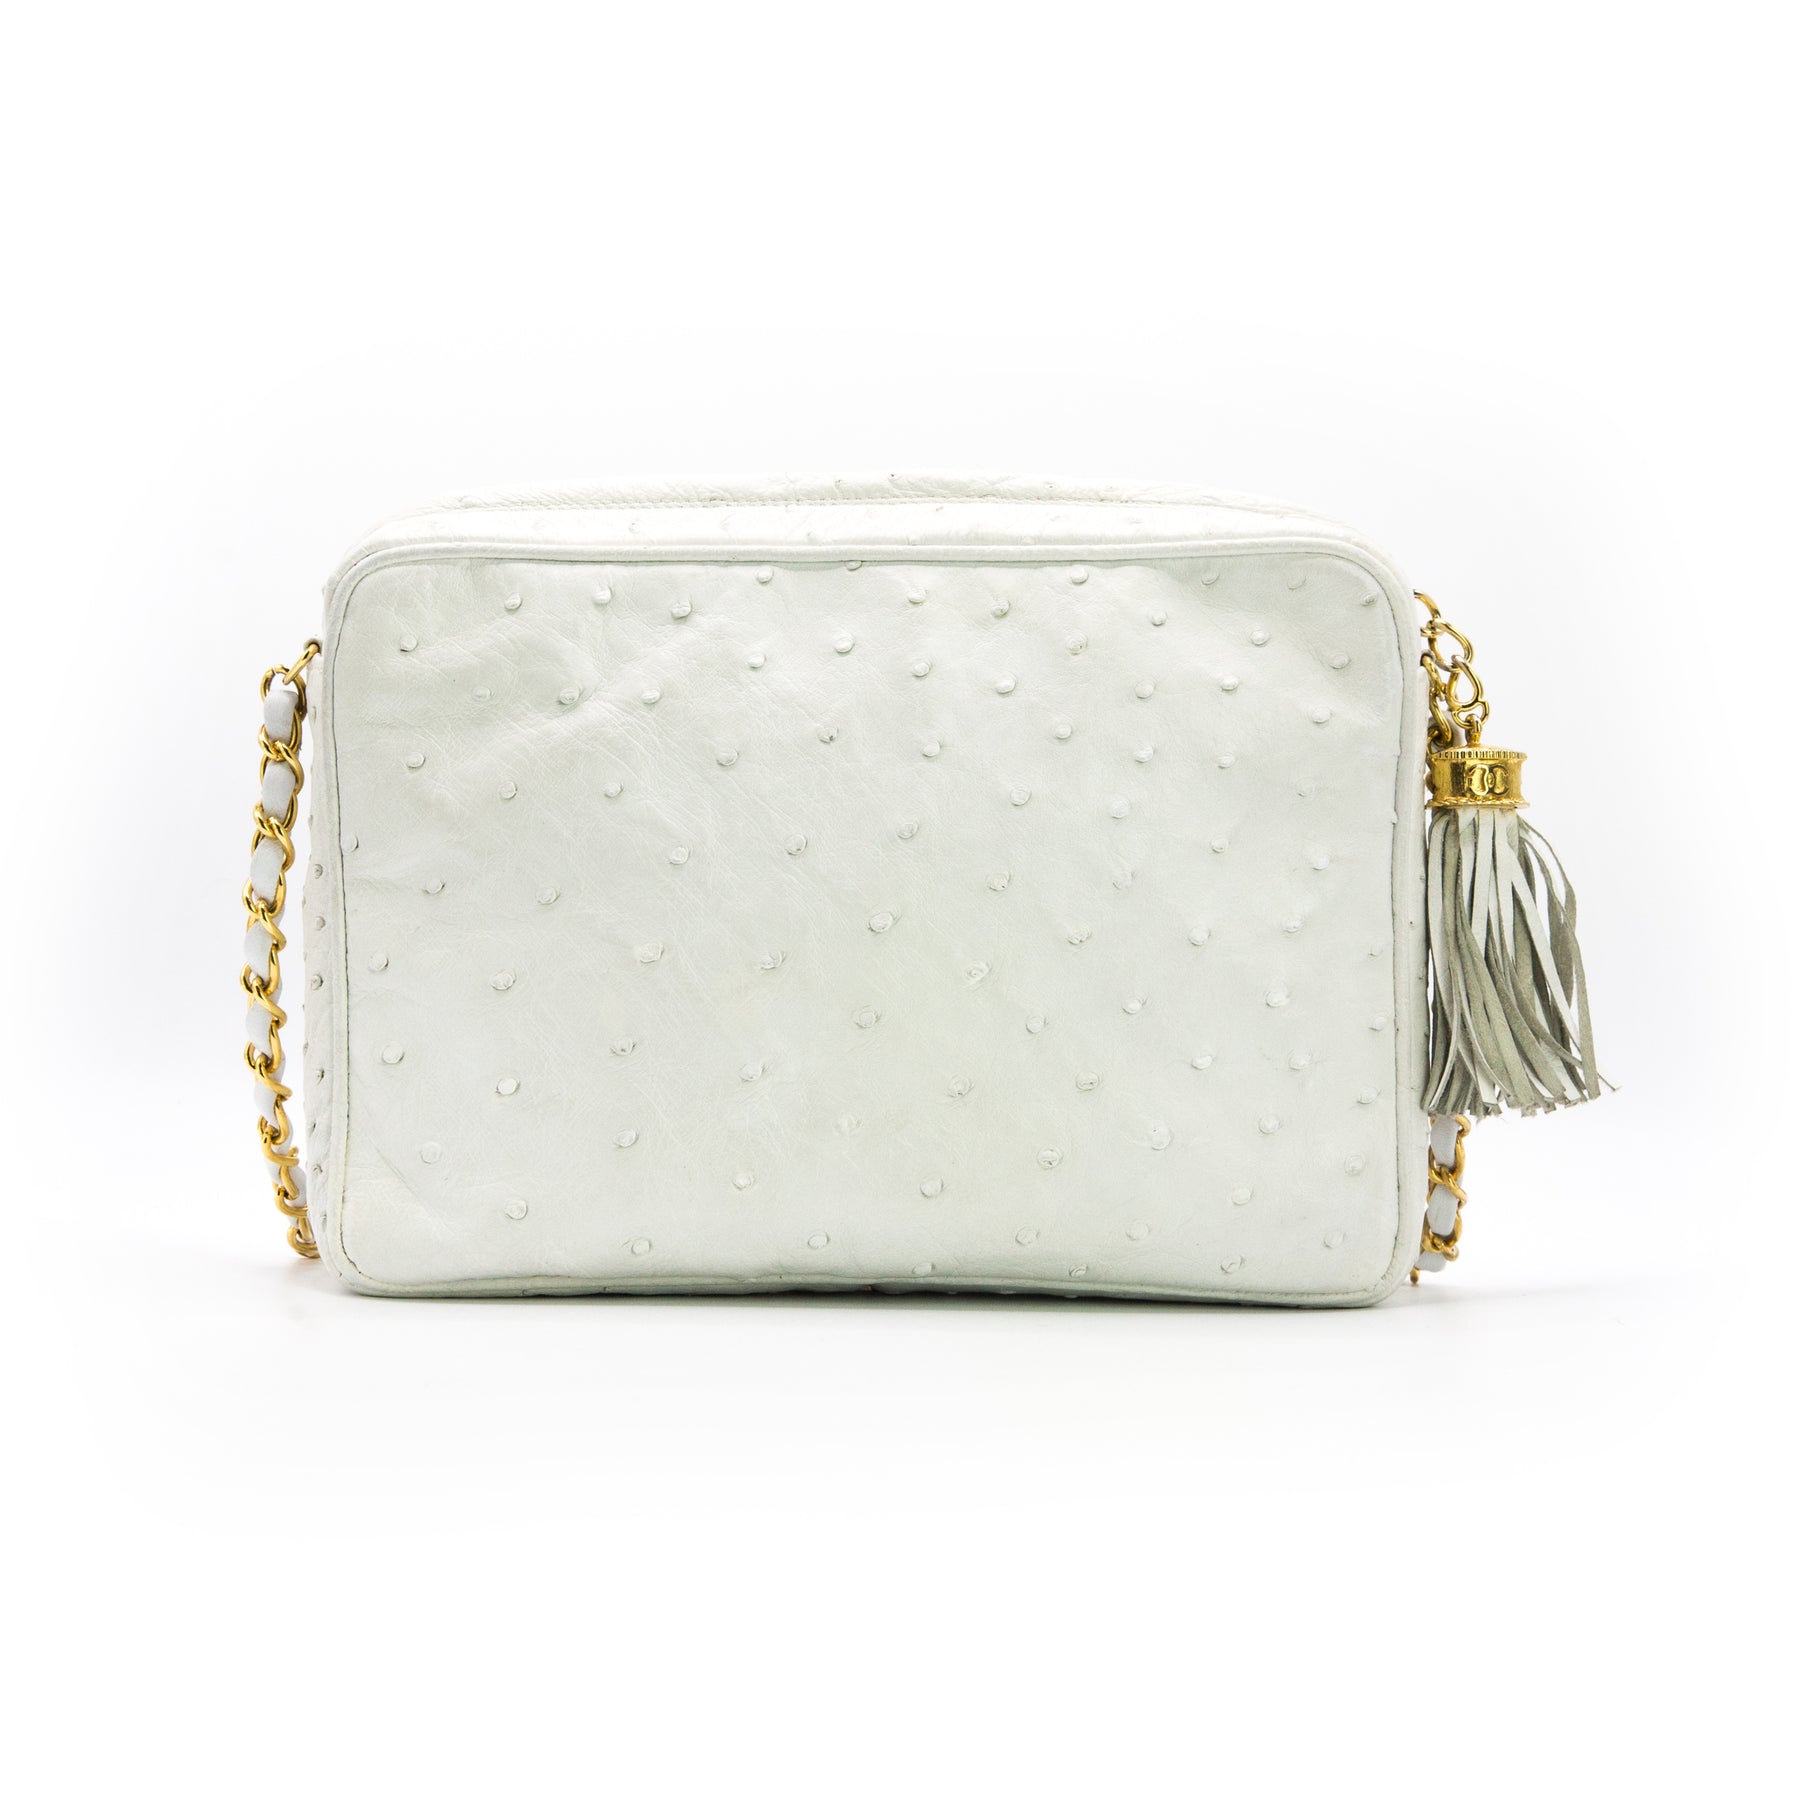 Only 855.00 usd for Chanel Vintage White Ostrich Camera Bag Online at the  Shop